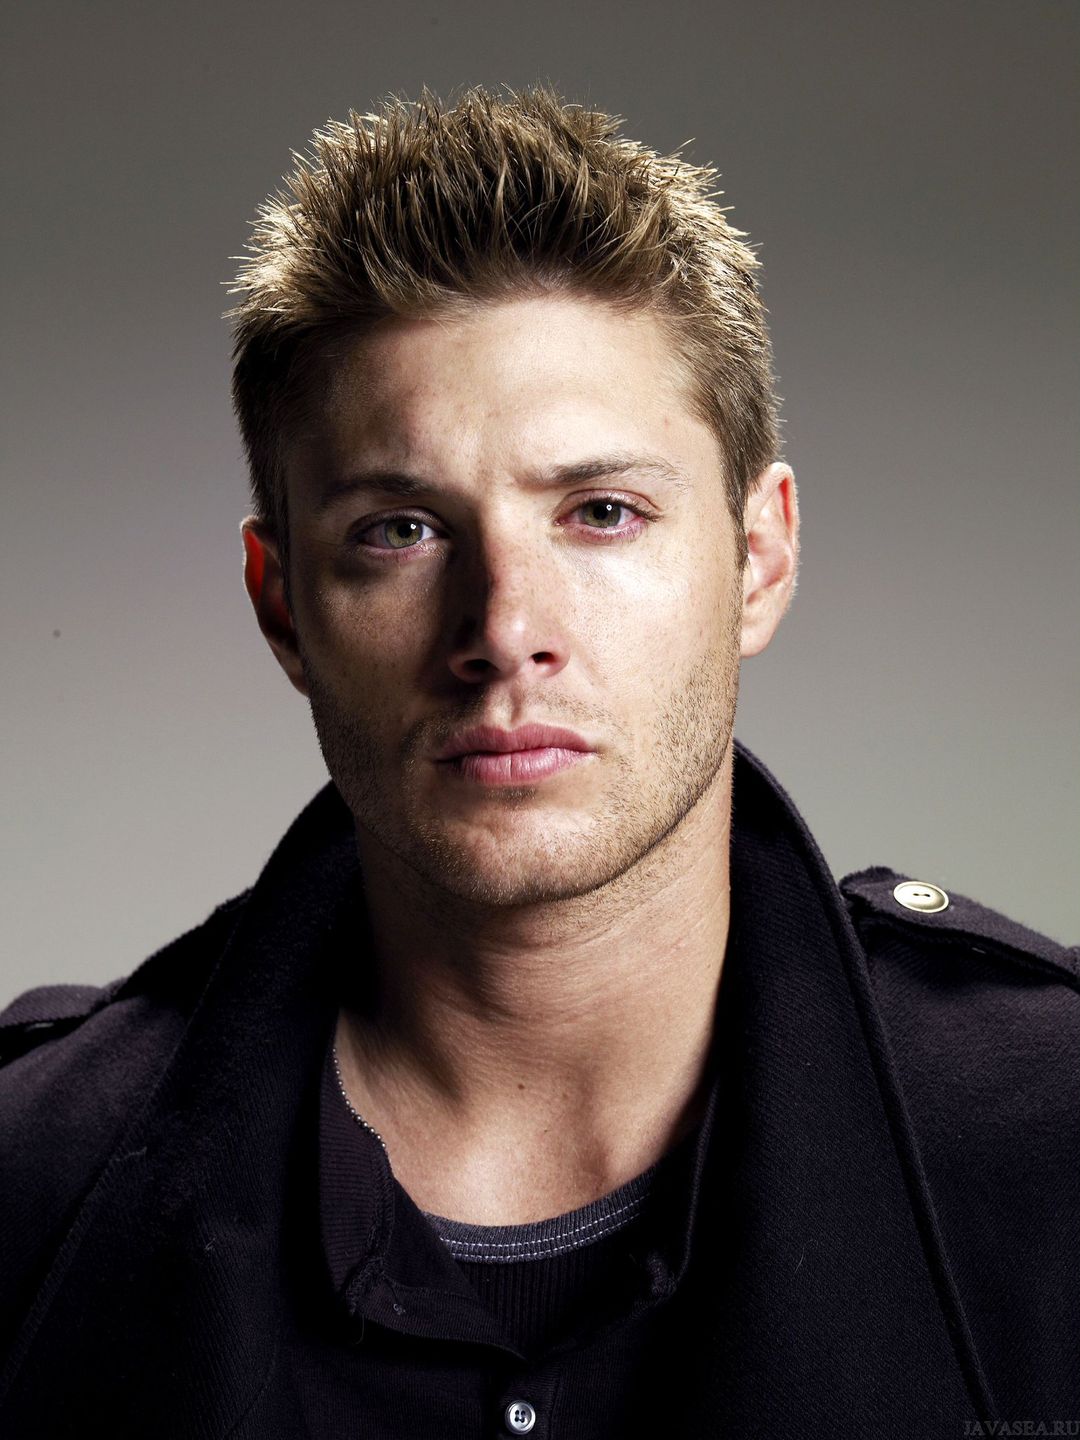 Jensen Ackles in his youth